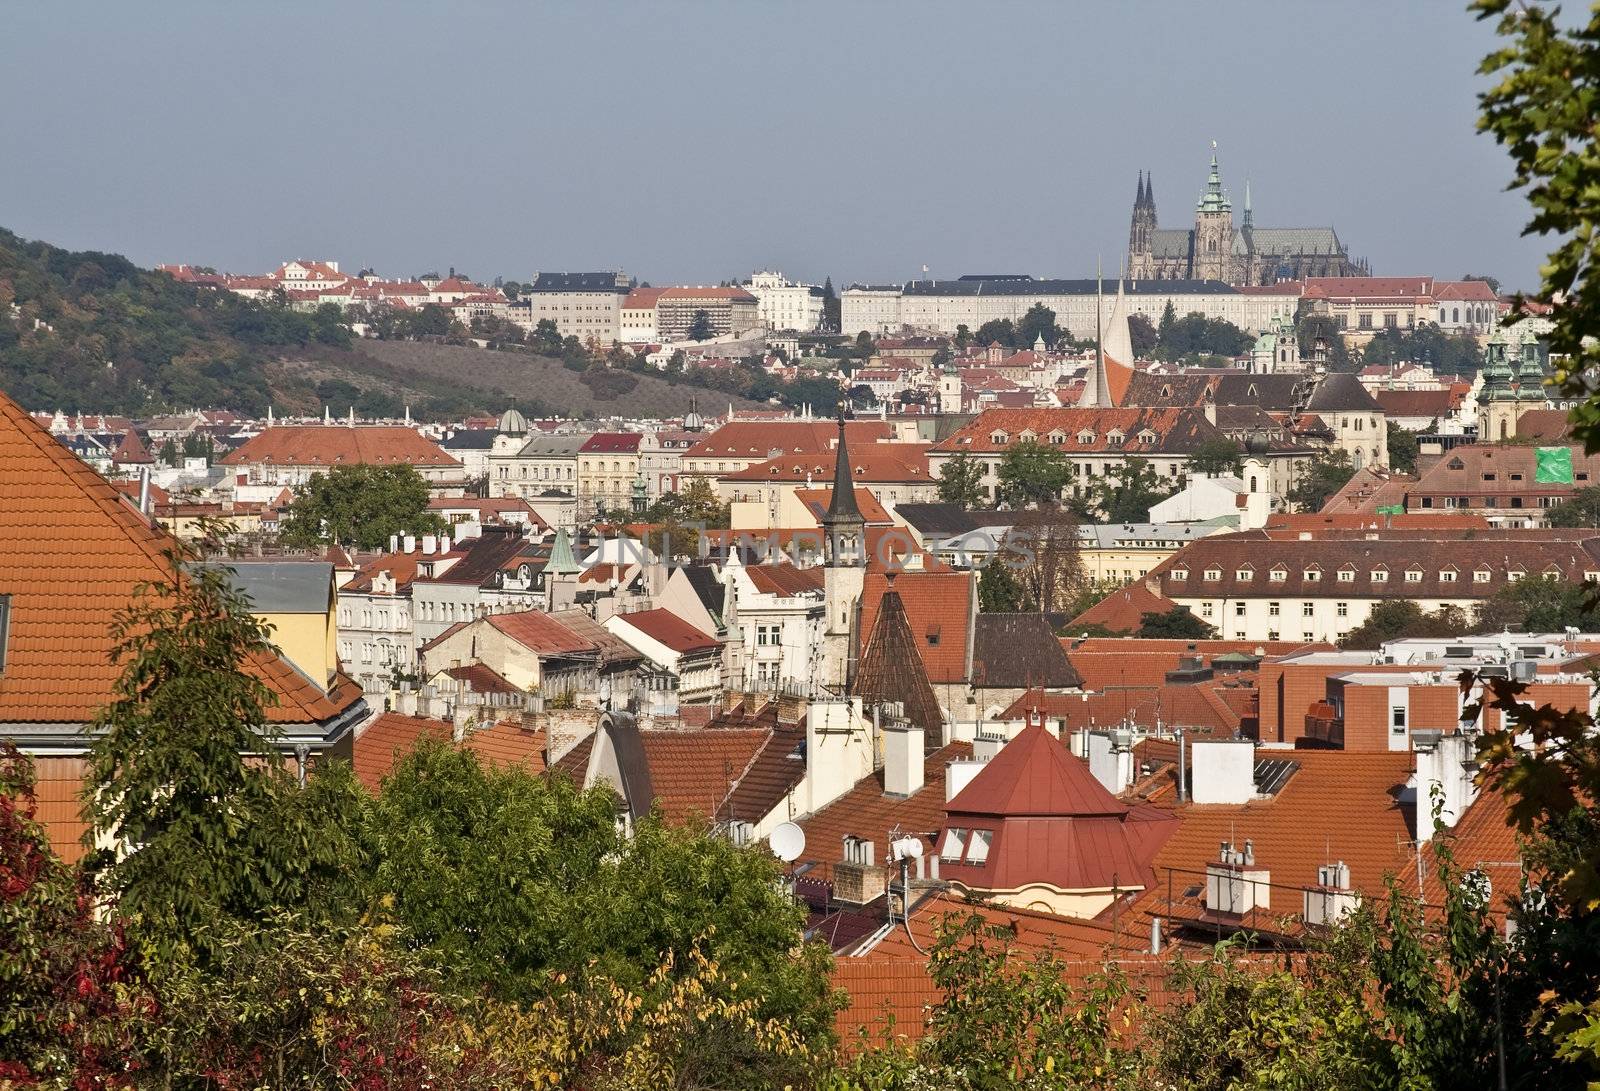 	
view of Prague with a view of Prague Castle